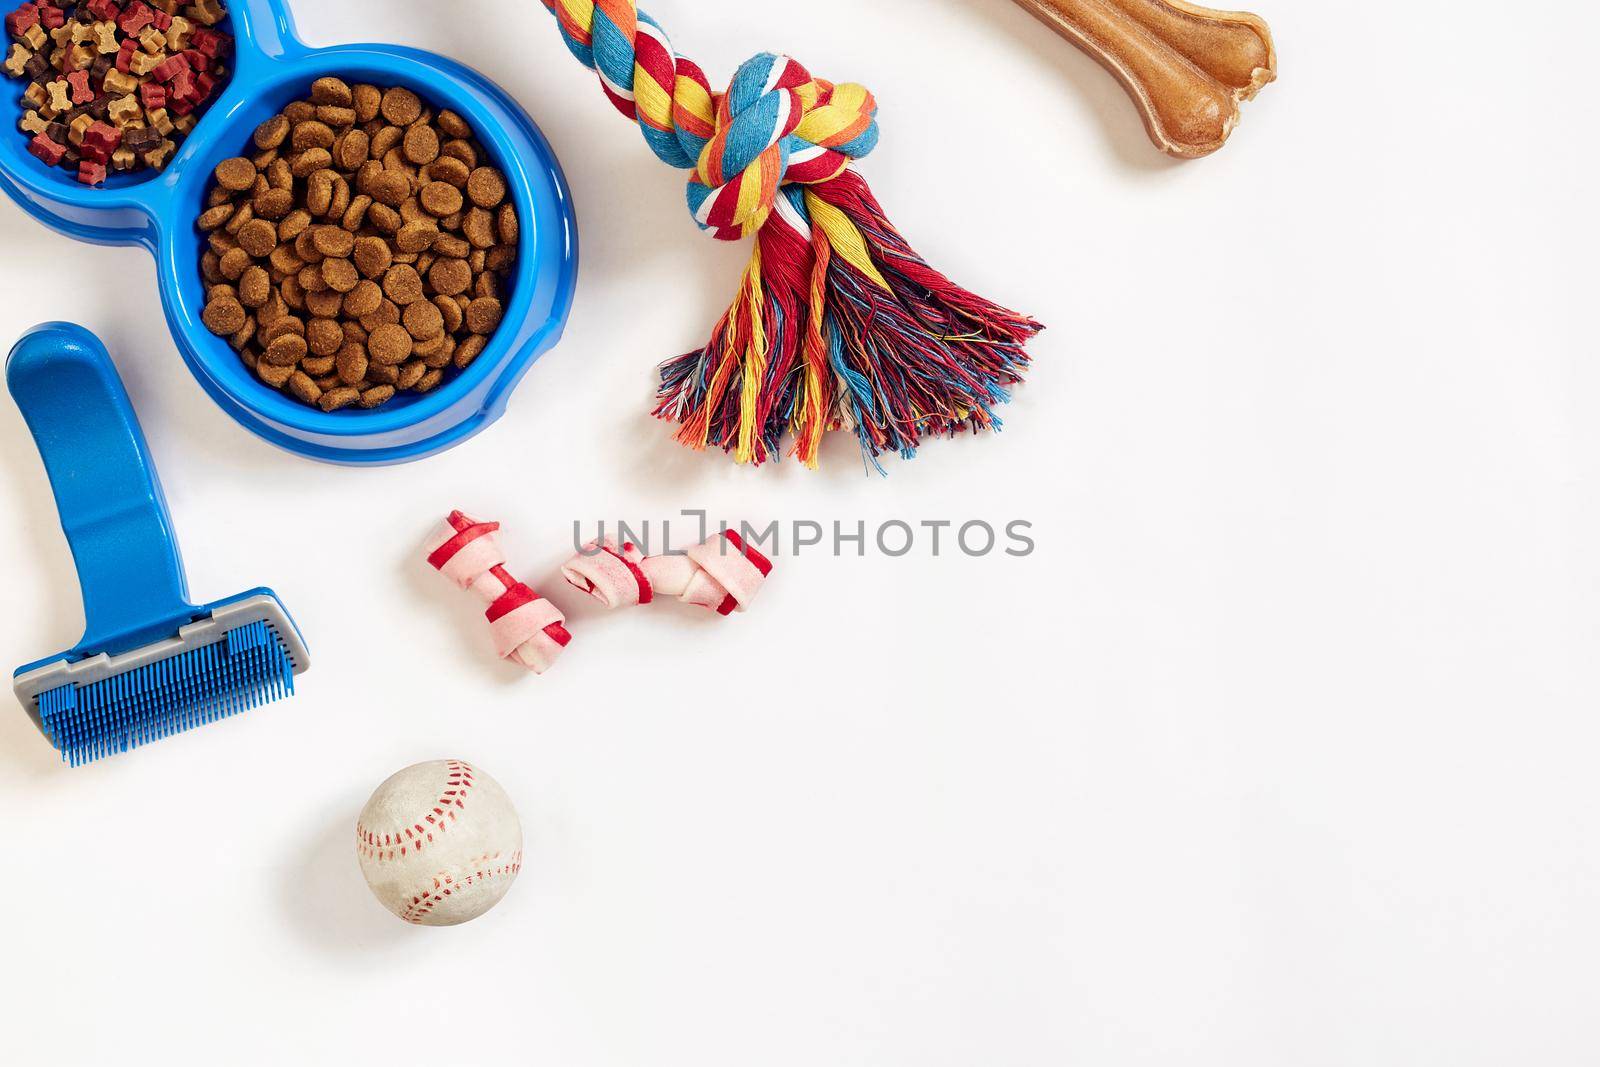 Dog care items, isolated on white background. Dry pet food in bowl, toy and bones. Top view. Copy space. Still life. Flat lay.